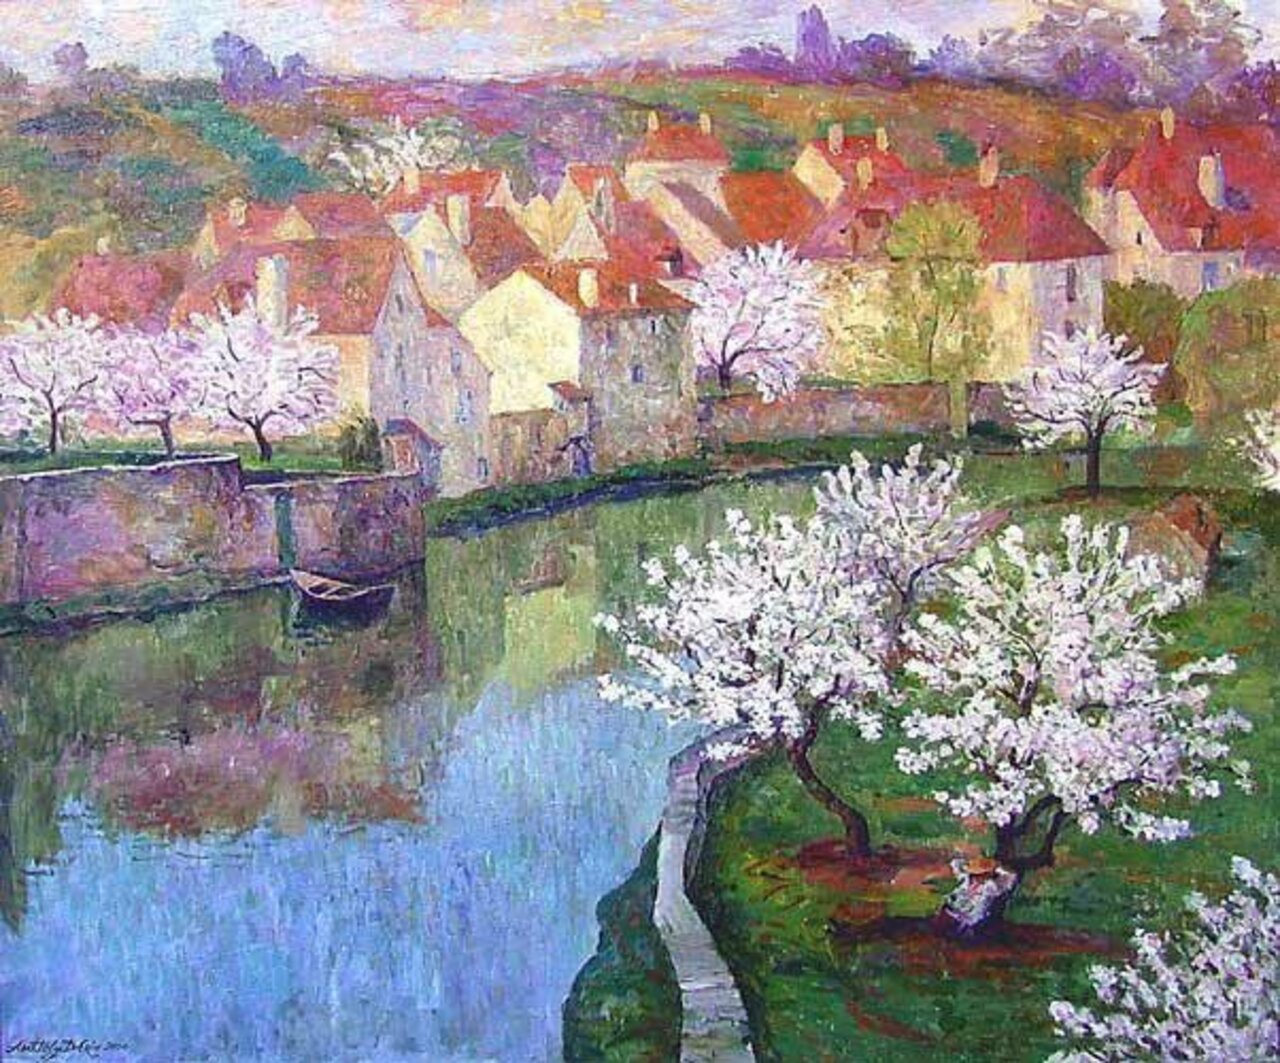 Painting by Anatoly Dverin - #pintura #art #artwit #twitart #painting https://t.co/hV8Cex9133